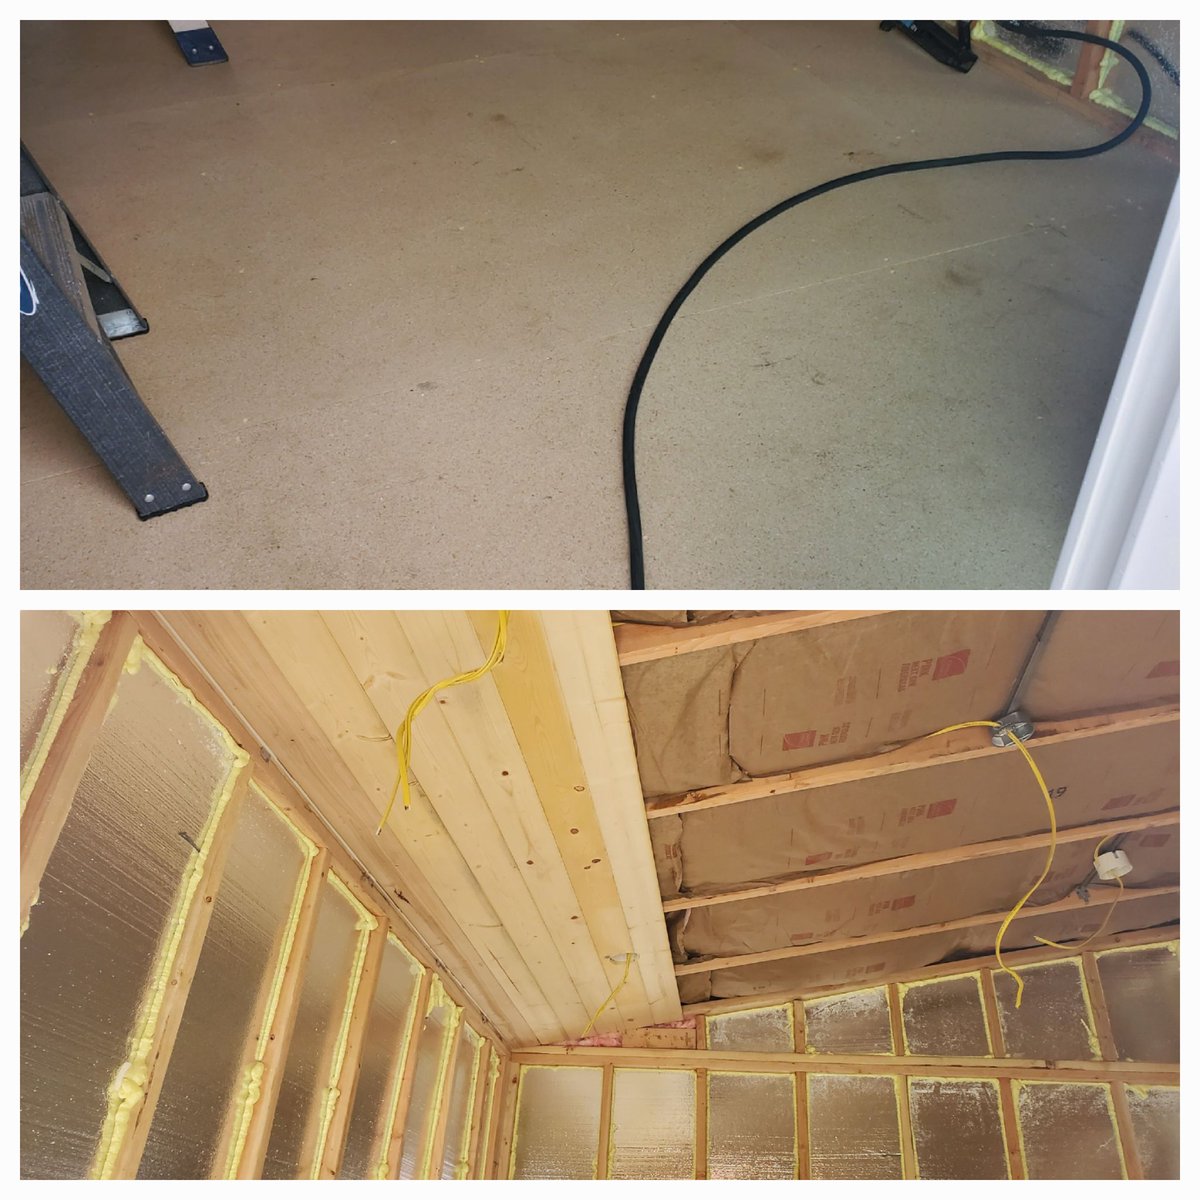 Update: Sub-floor done, and started tongue n groove..